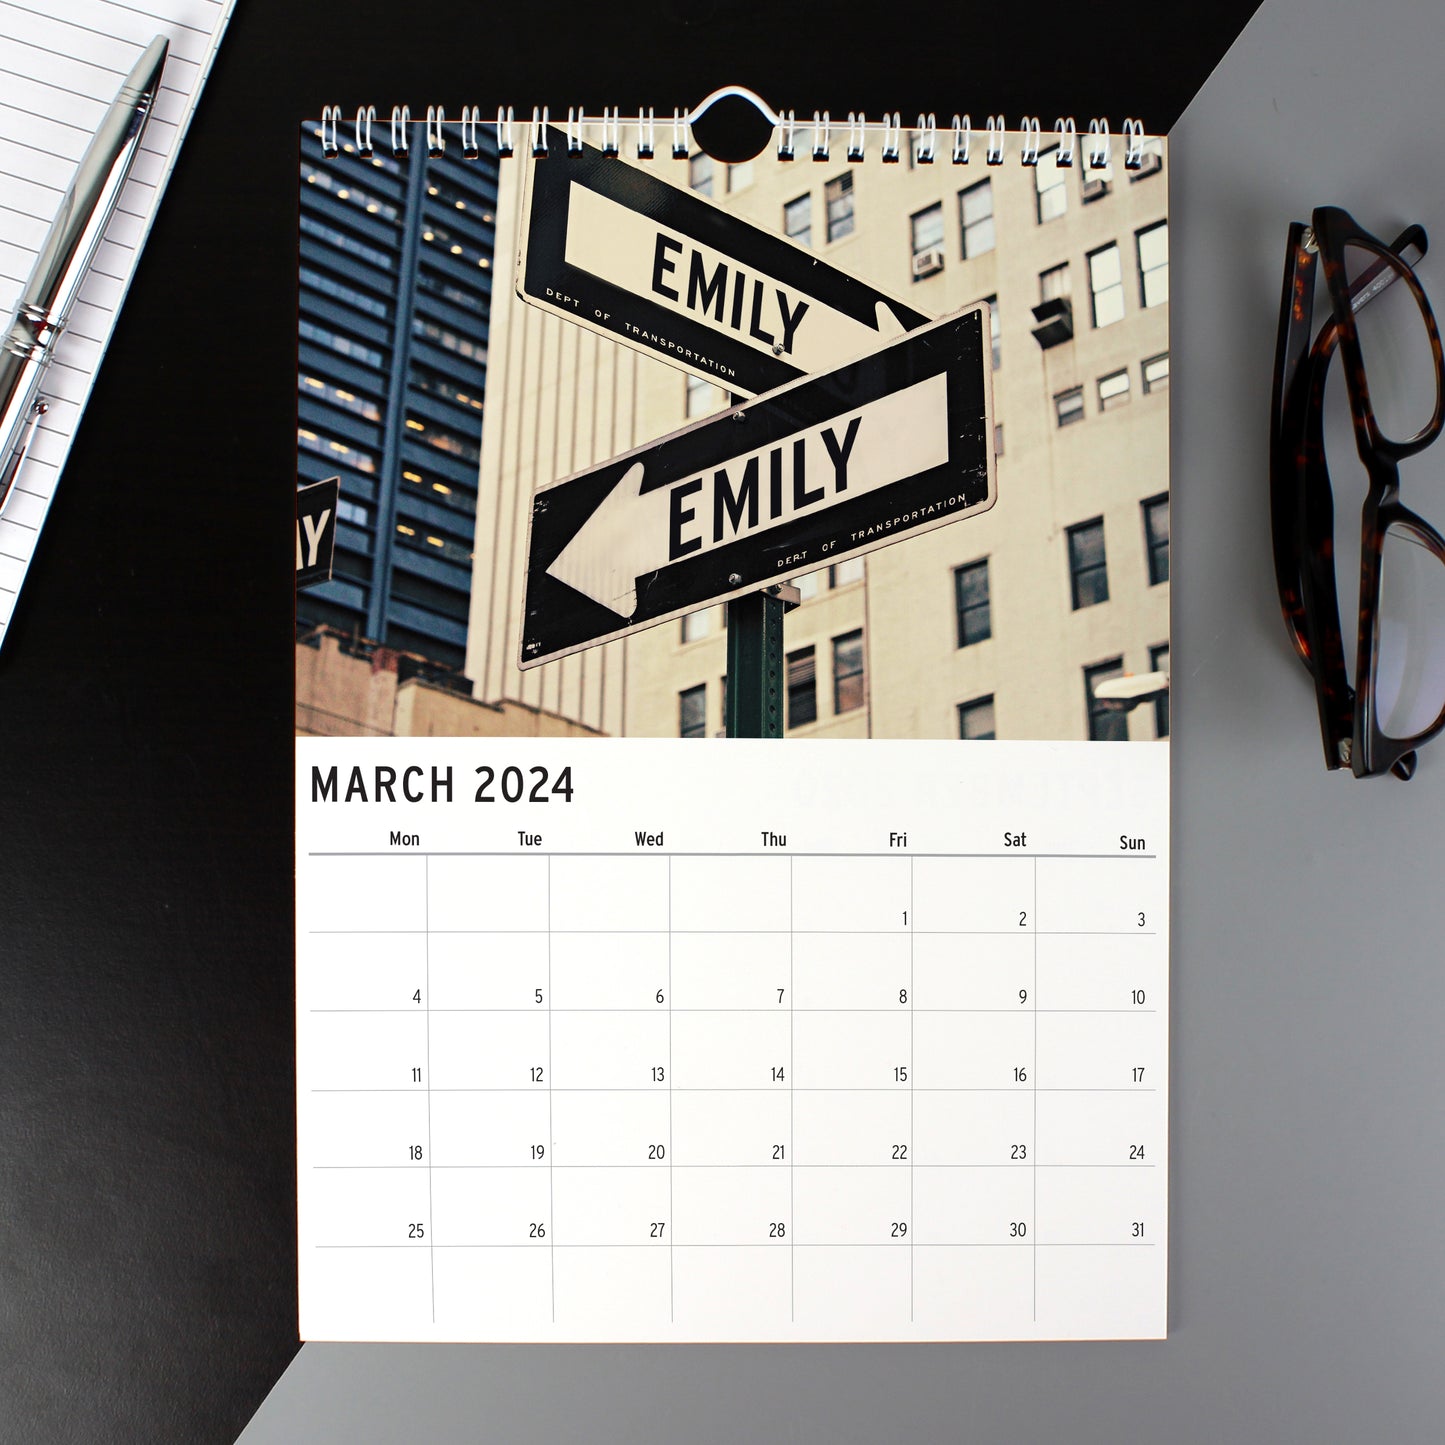 Personalised A4 New York Calendar - Personalise It!